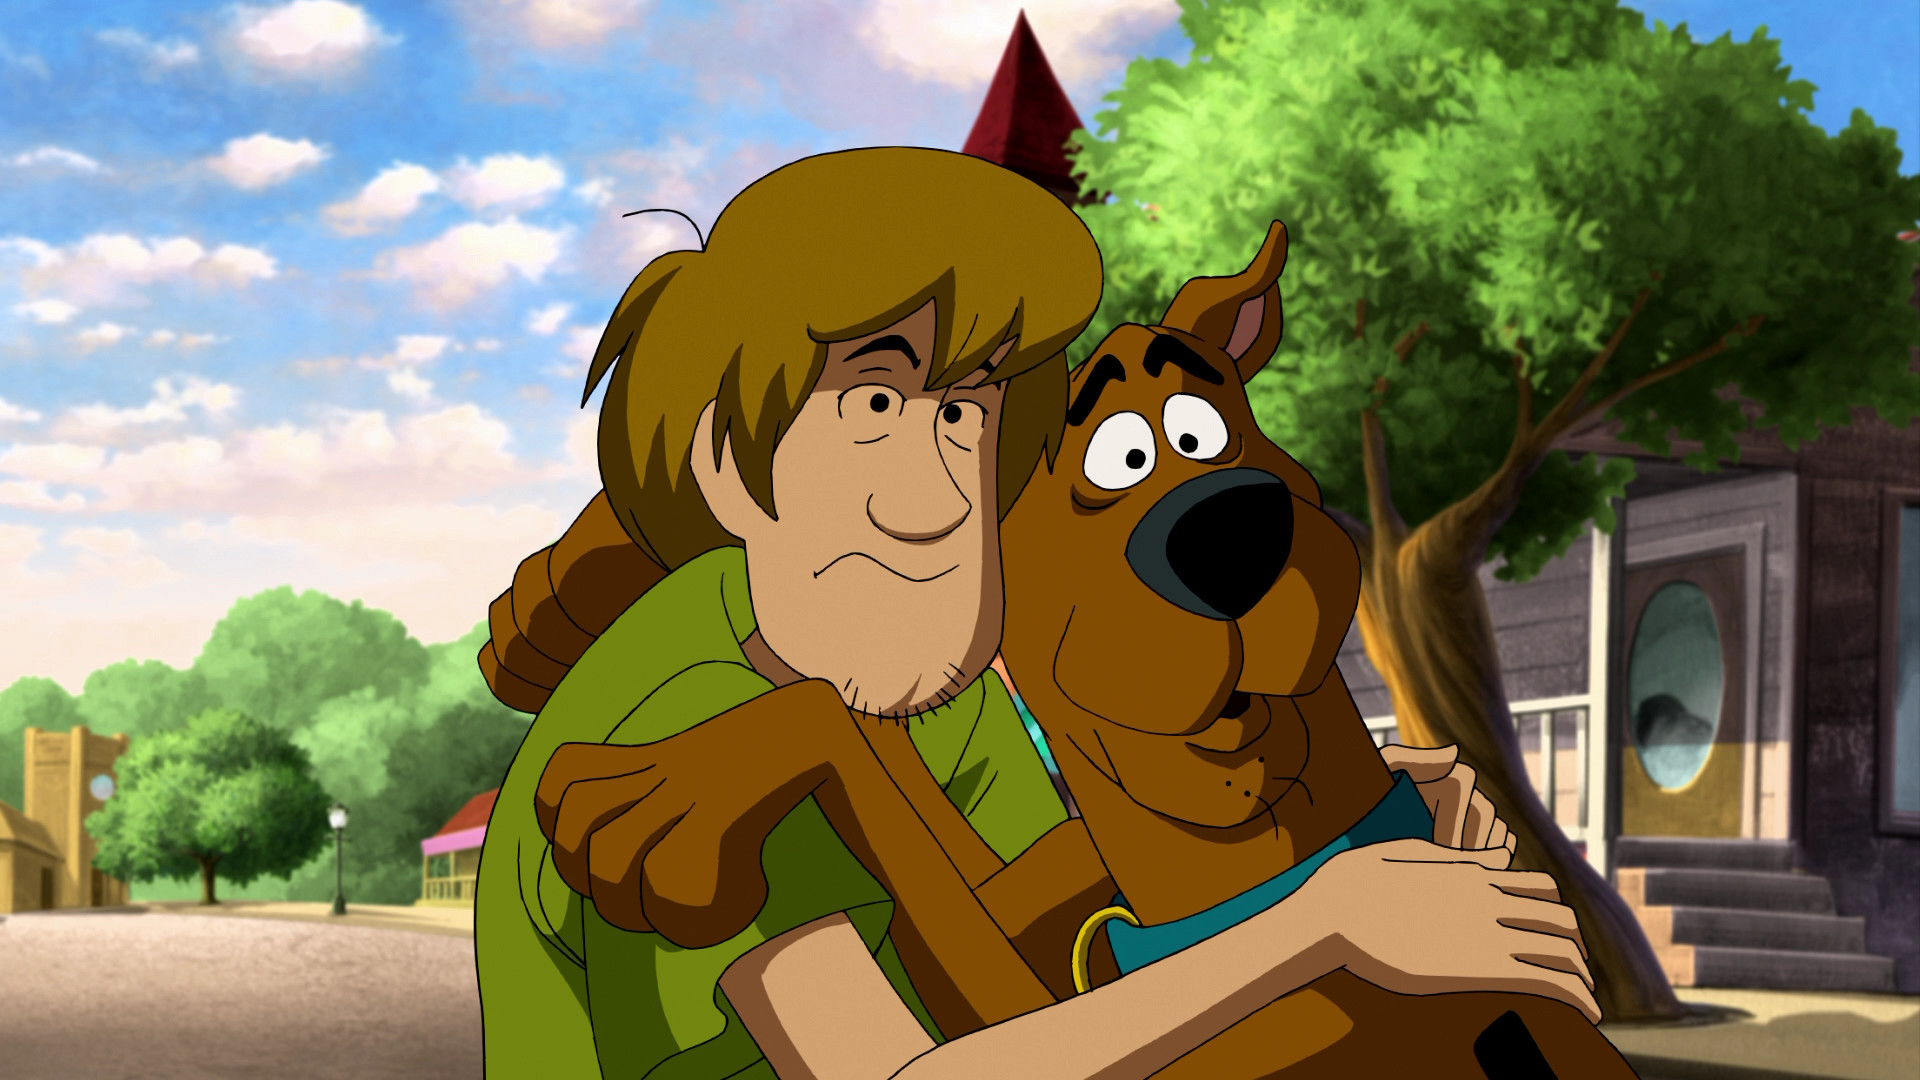 1920x1080 Related Wallpapers from Scooby Doo Wallpaper. 